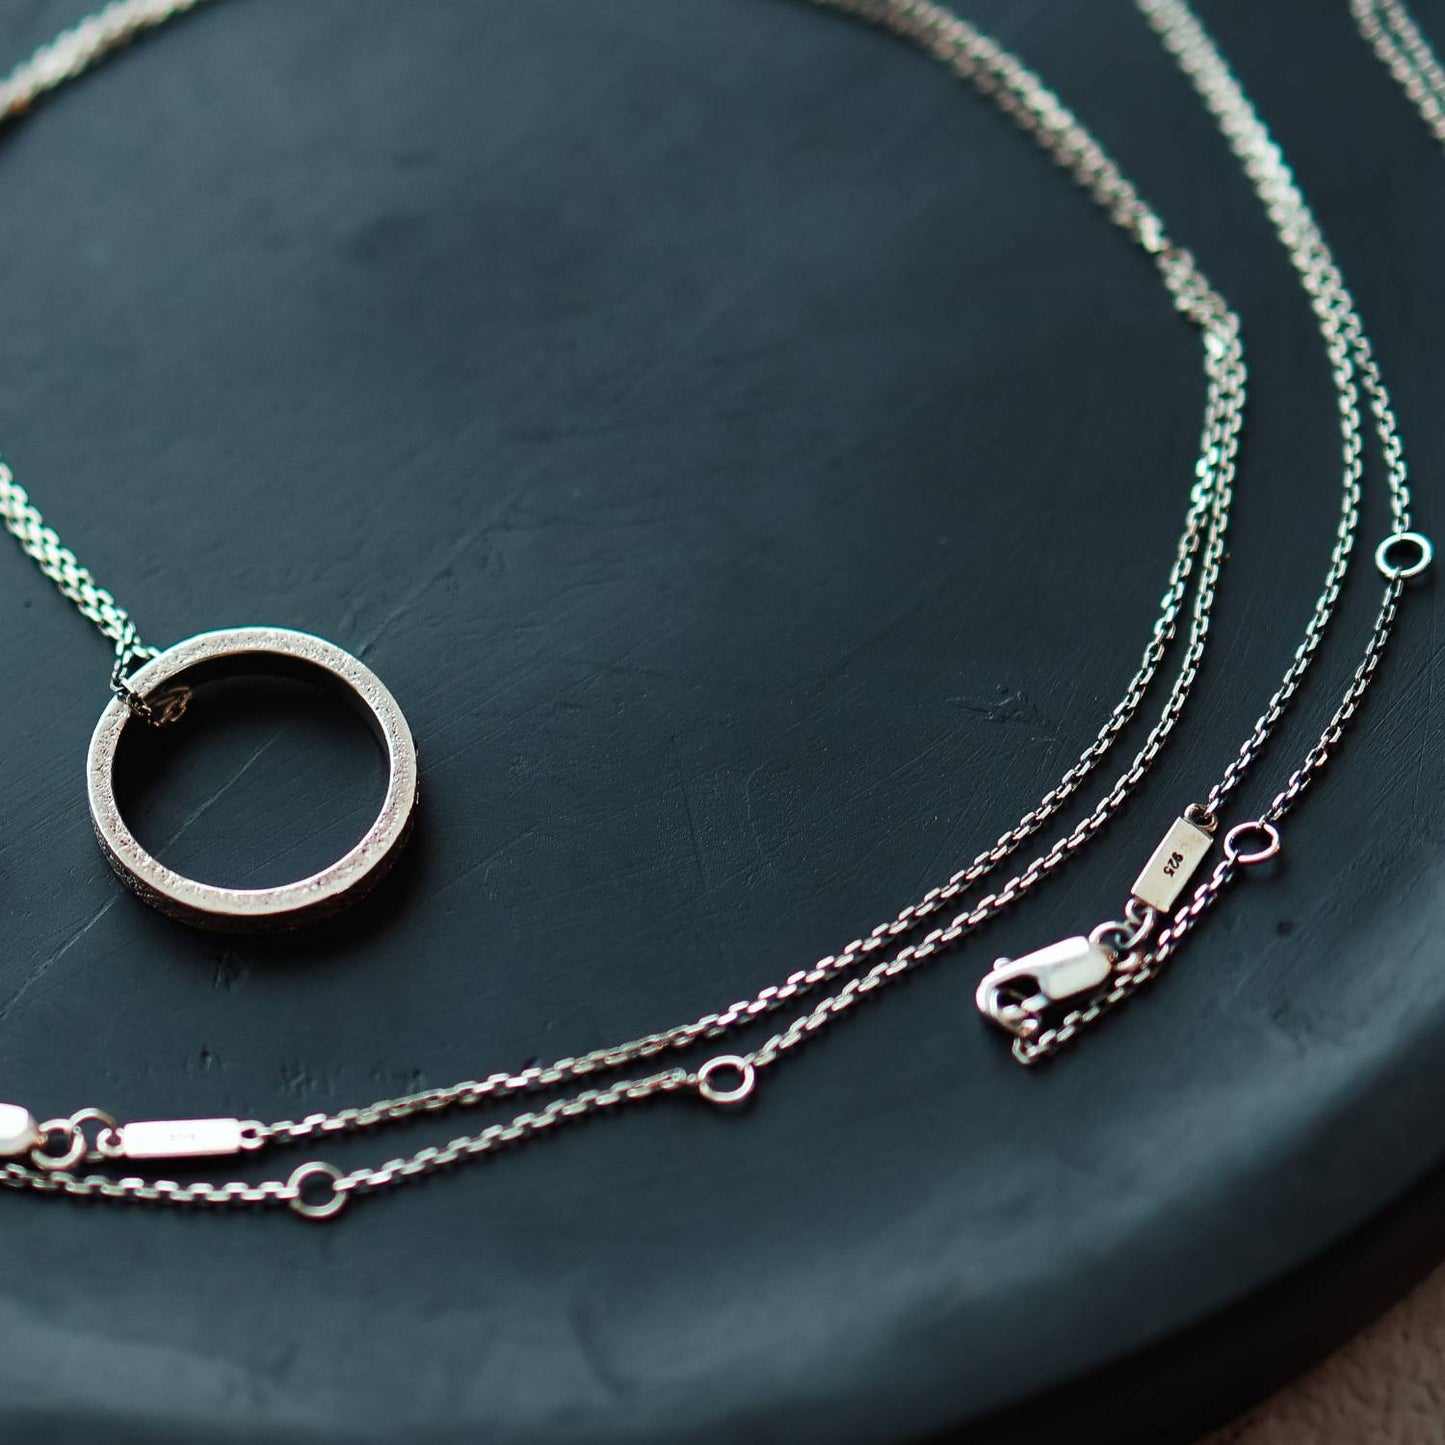 CIRCLE NECKLACE. - 925 Silver Chain - PALM. | Handcrafted Jewelry-